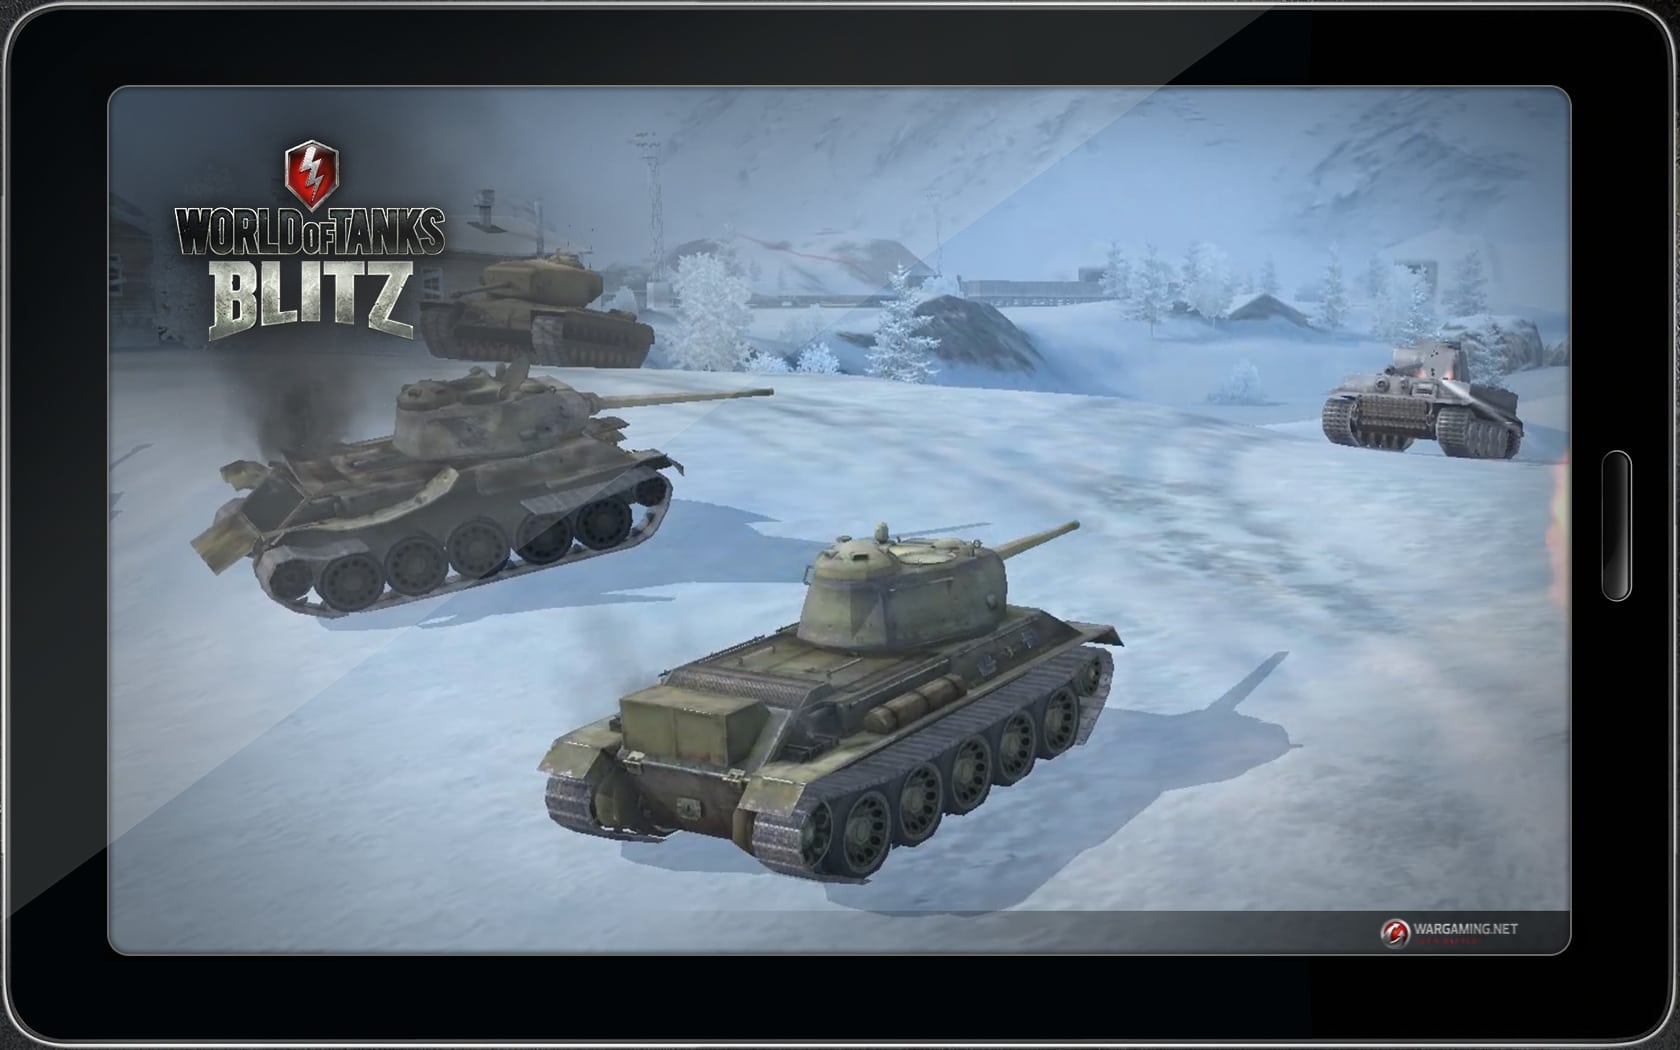 World of Tanks Blitz - Worldwide release date announced - MMO Culture